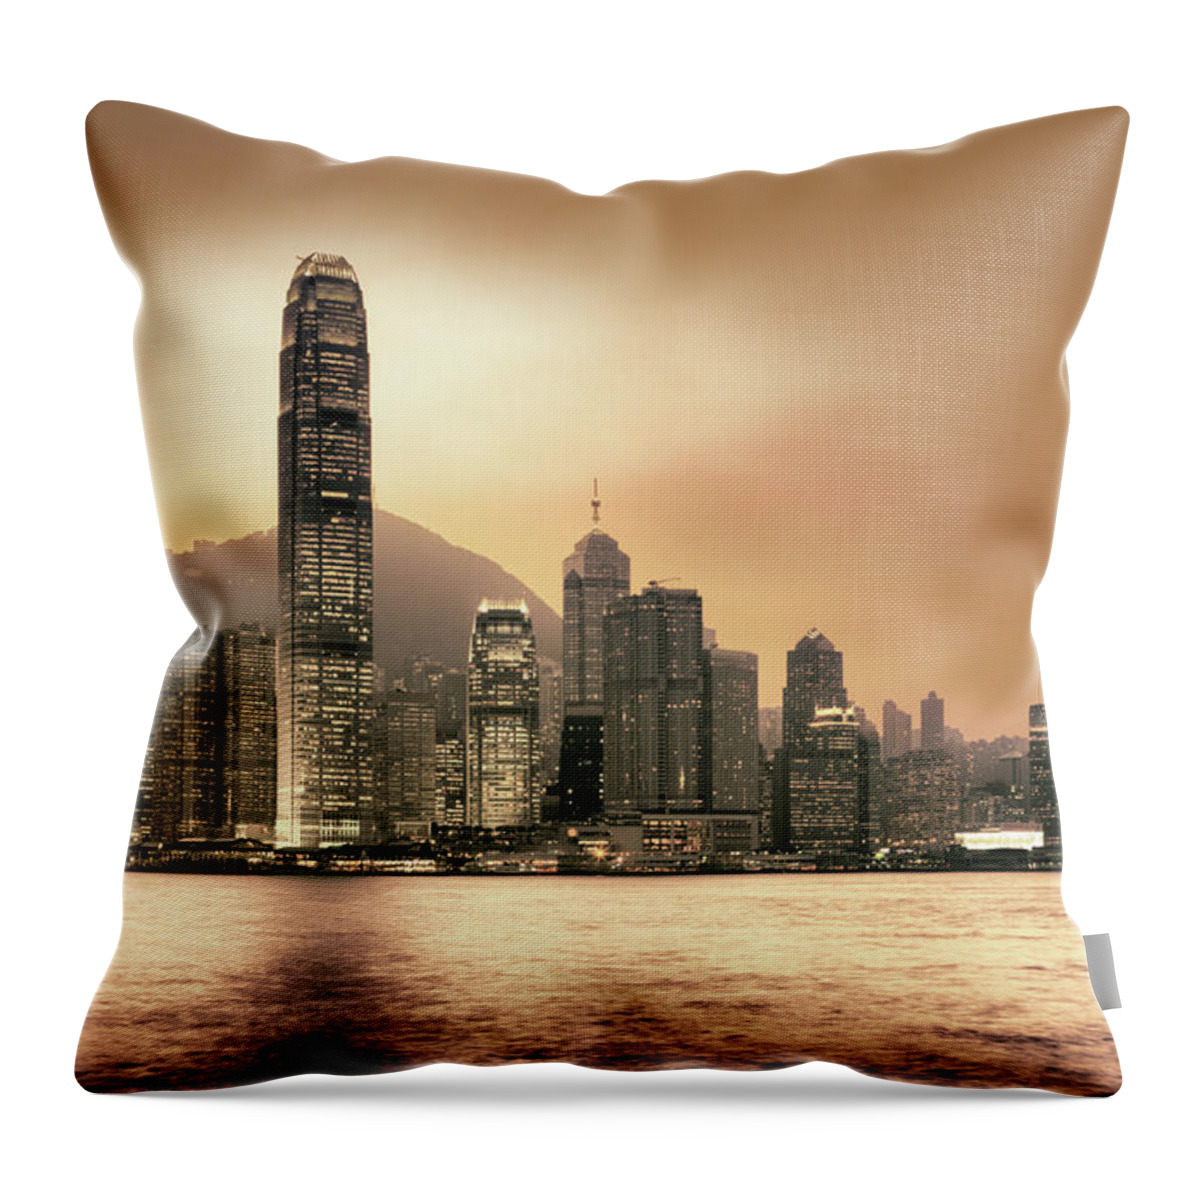 Chinese Culture Throw Pillow featuring the photograph Hong Kong At Sunset #3 by Laoshi